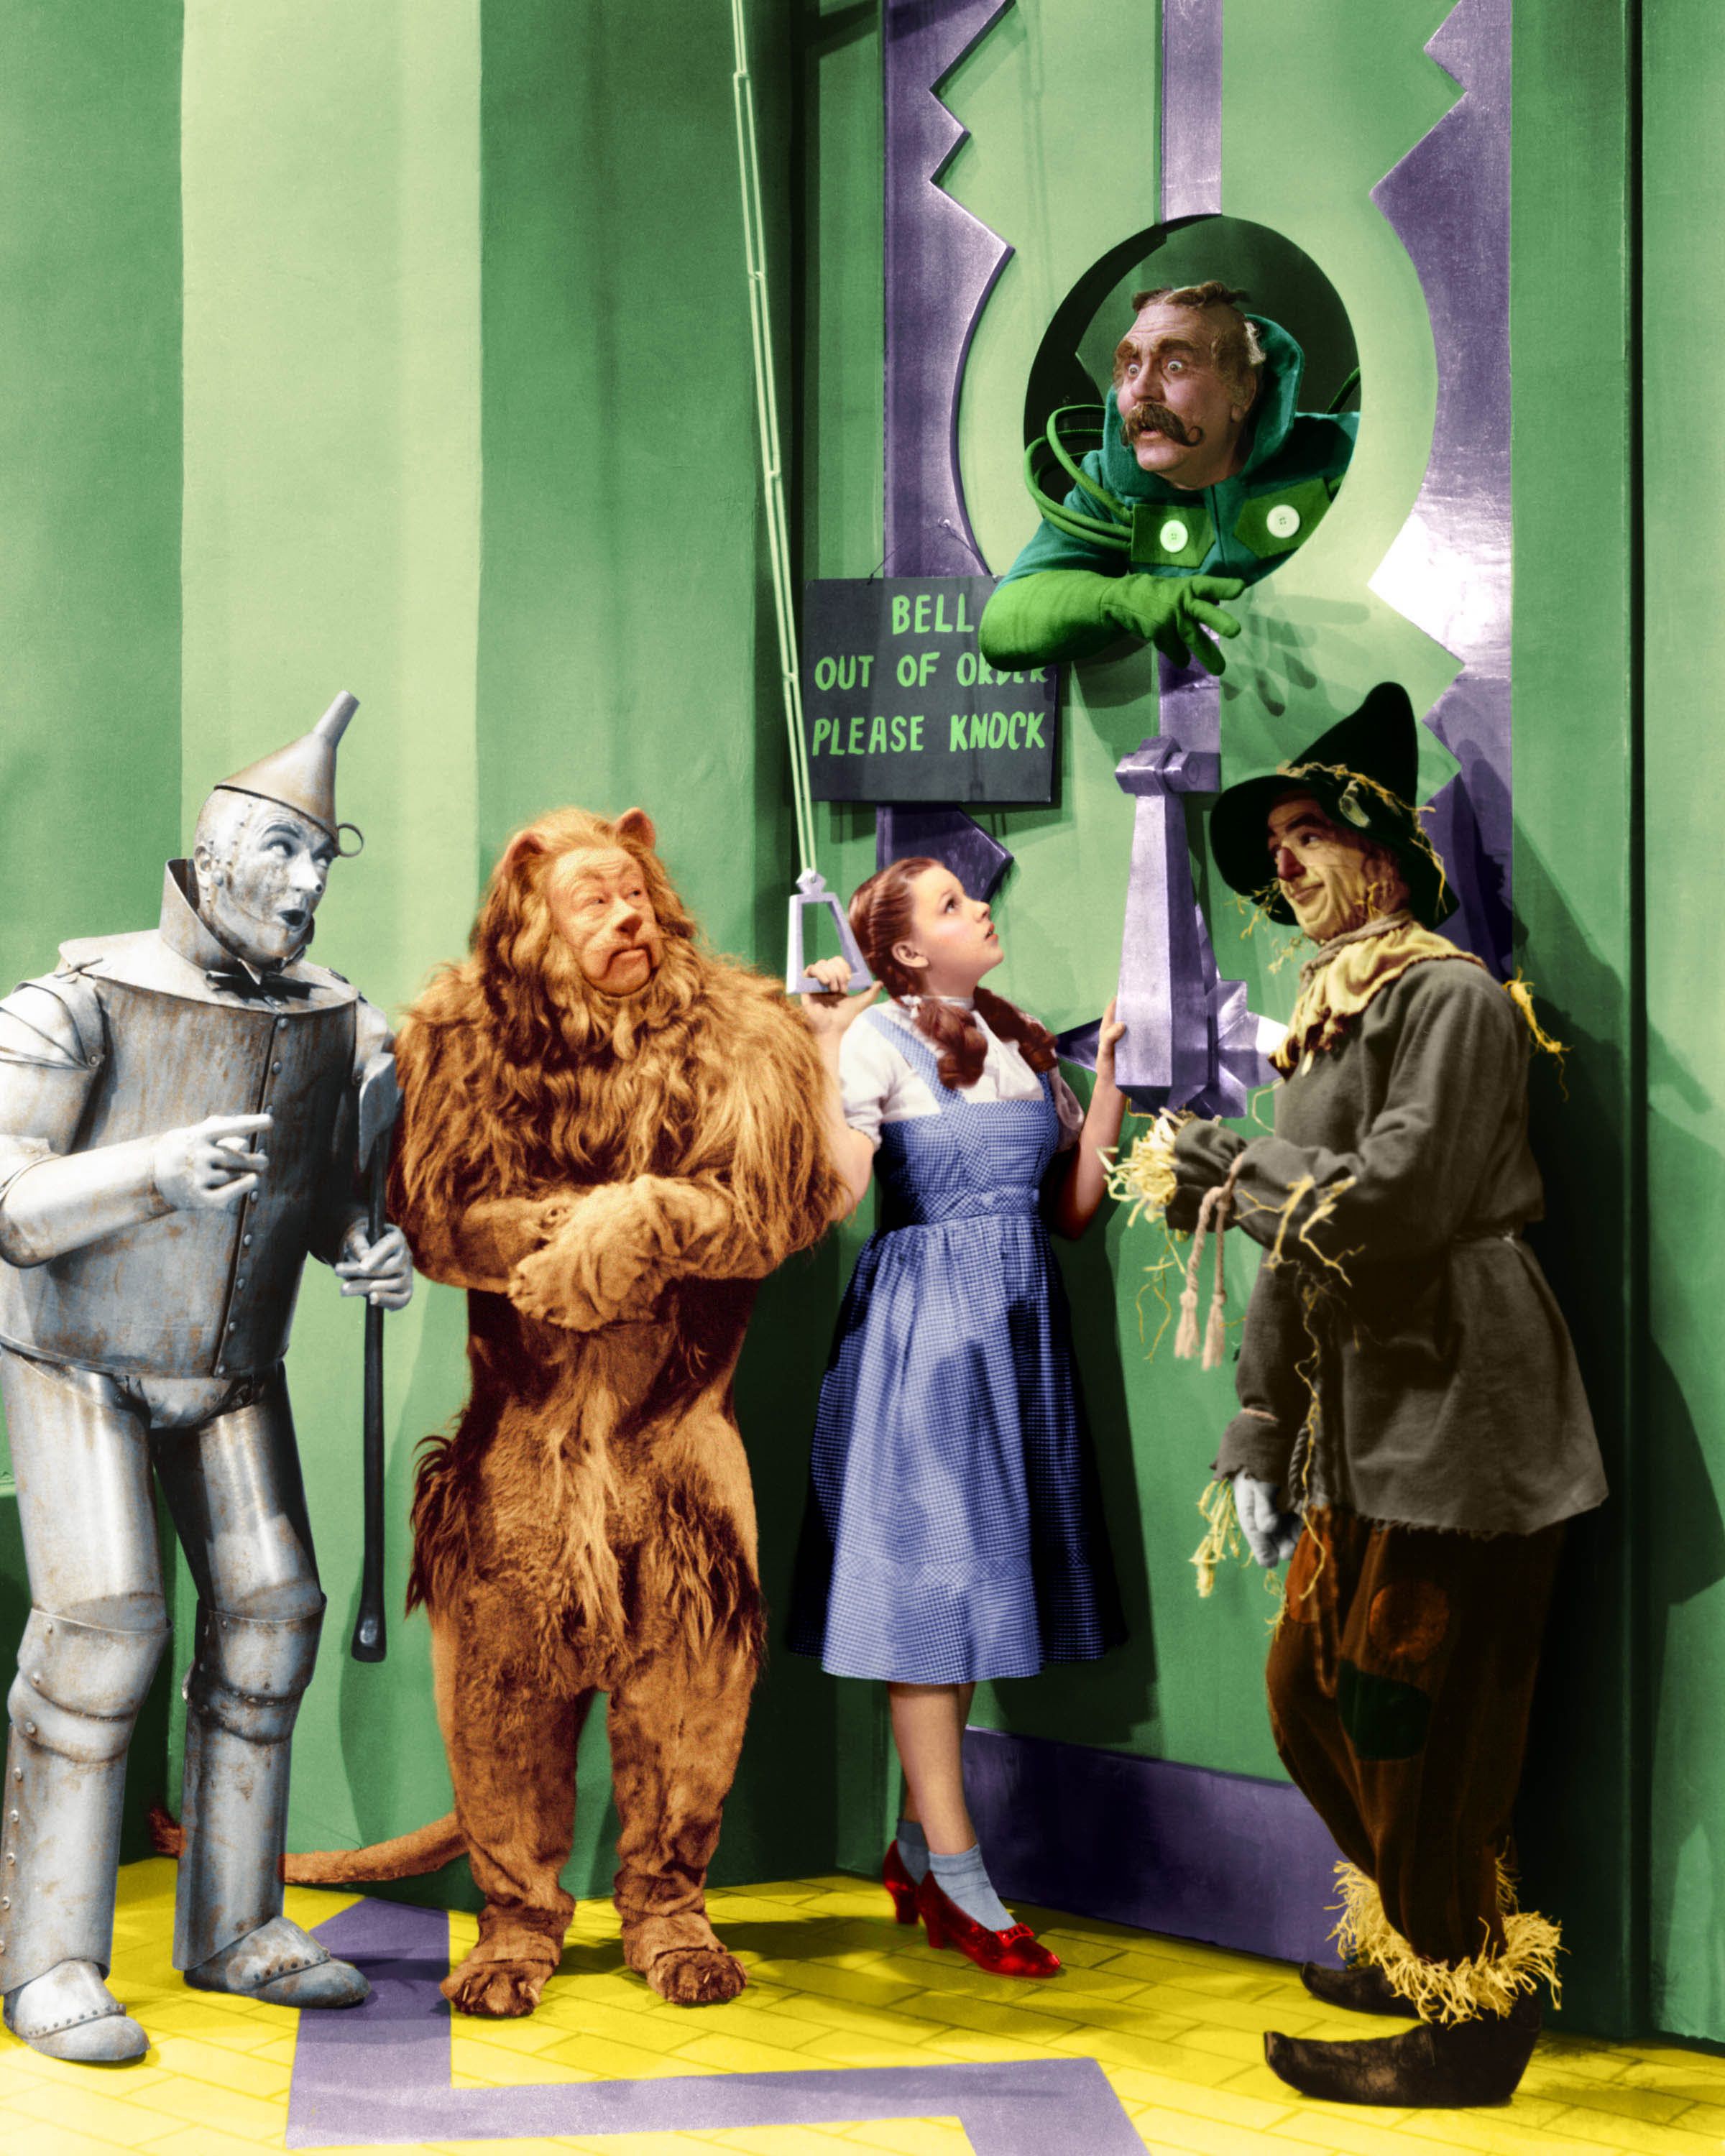 28 Whimsical Trivia Facts About The Wizard of Oz